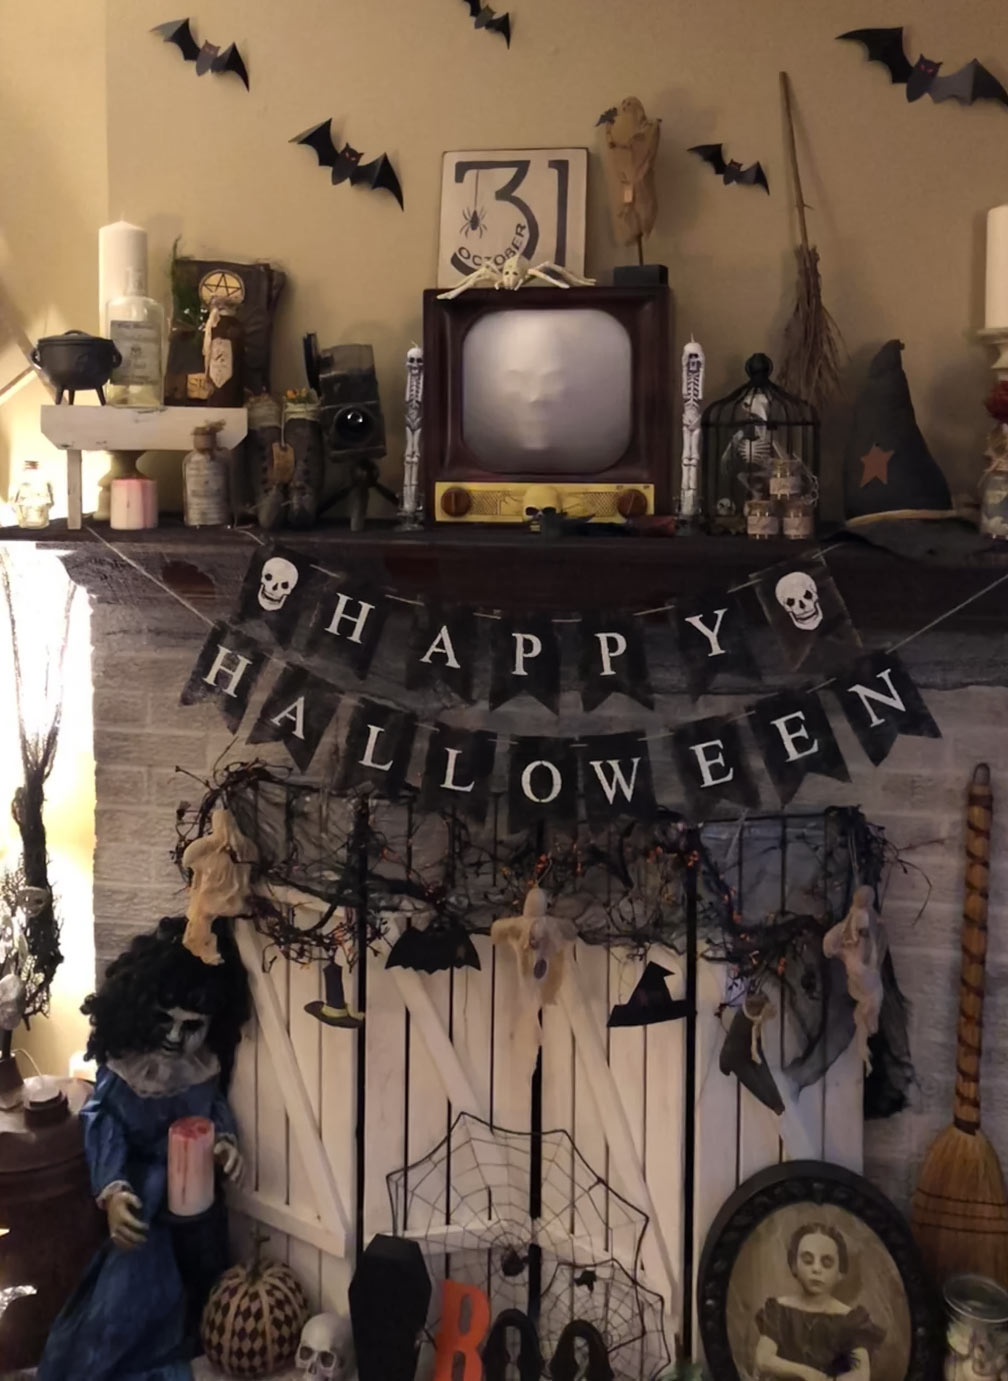 Fireplace decorated with garland banner Happy Halloween